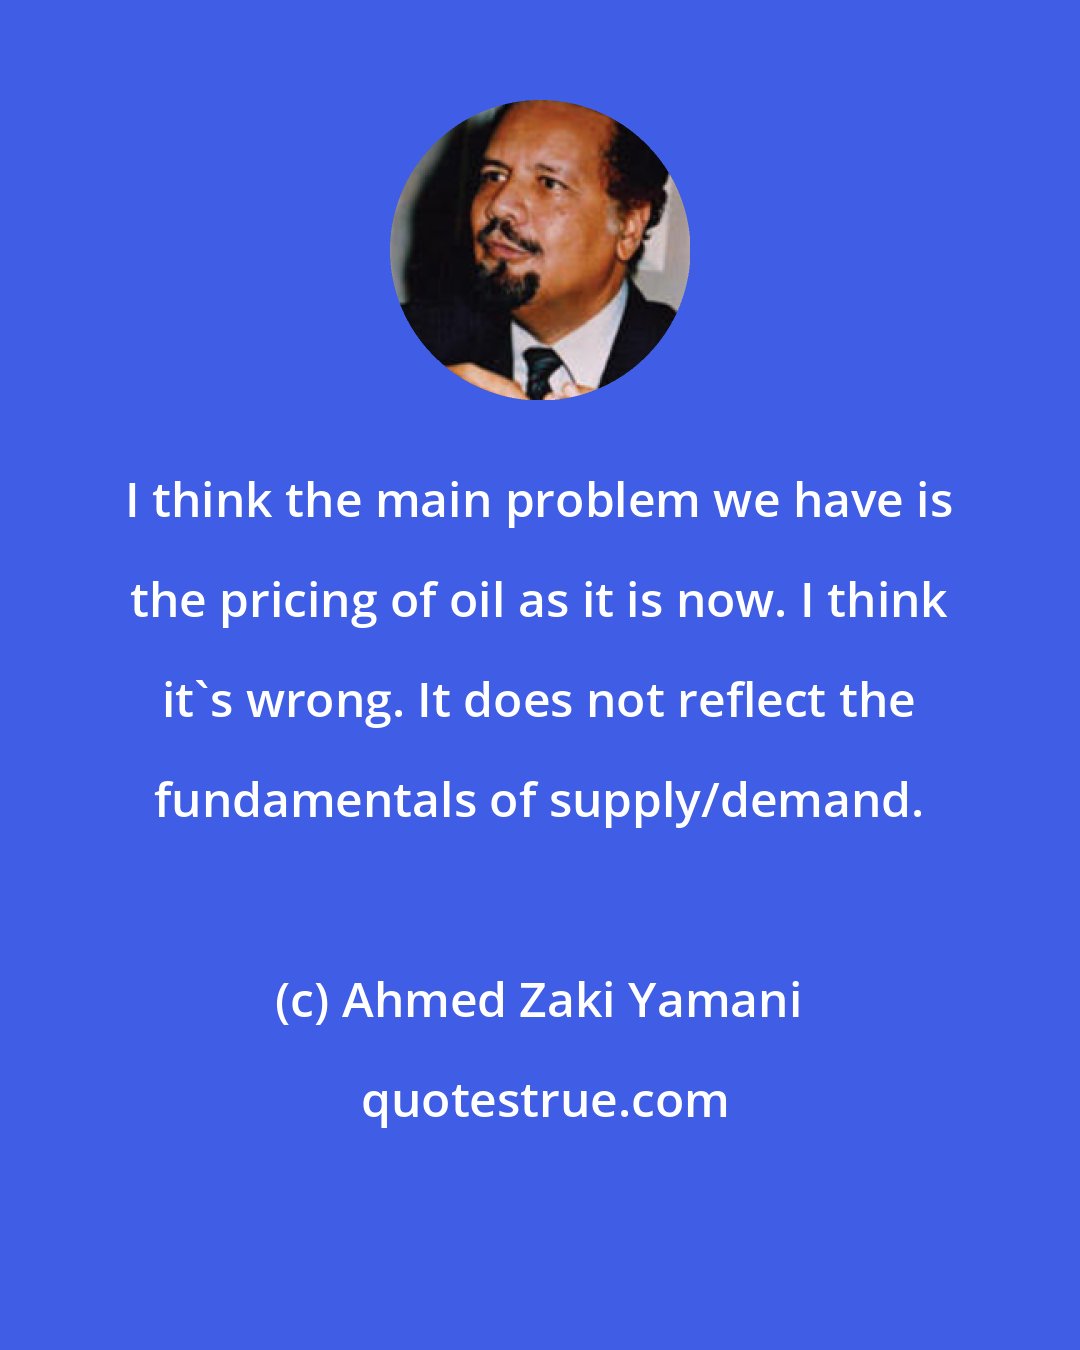 Ahmed Zaki Yamani: I think the main problem we have is the pricing of oil as it is now. I think it's wrong. It does not reflect the fundamentals of supply/demand.